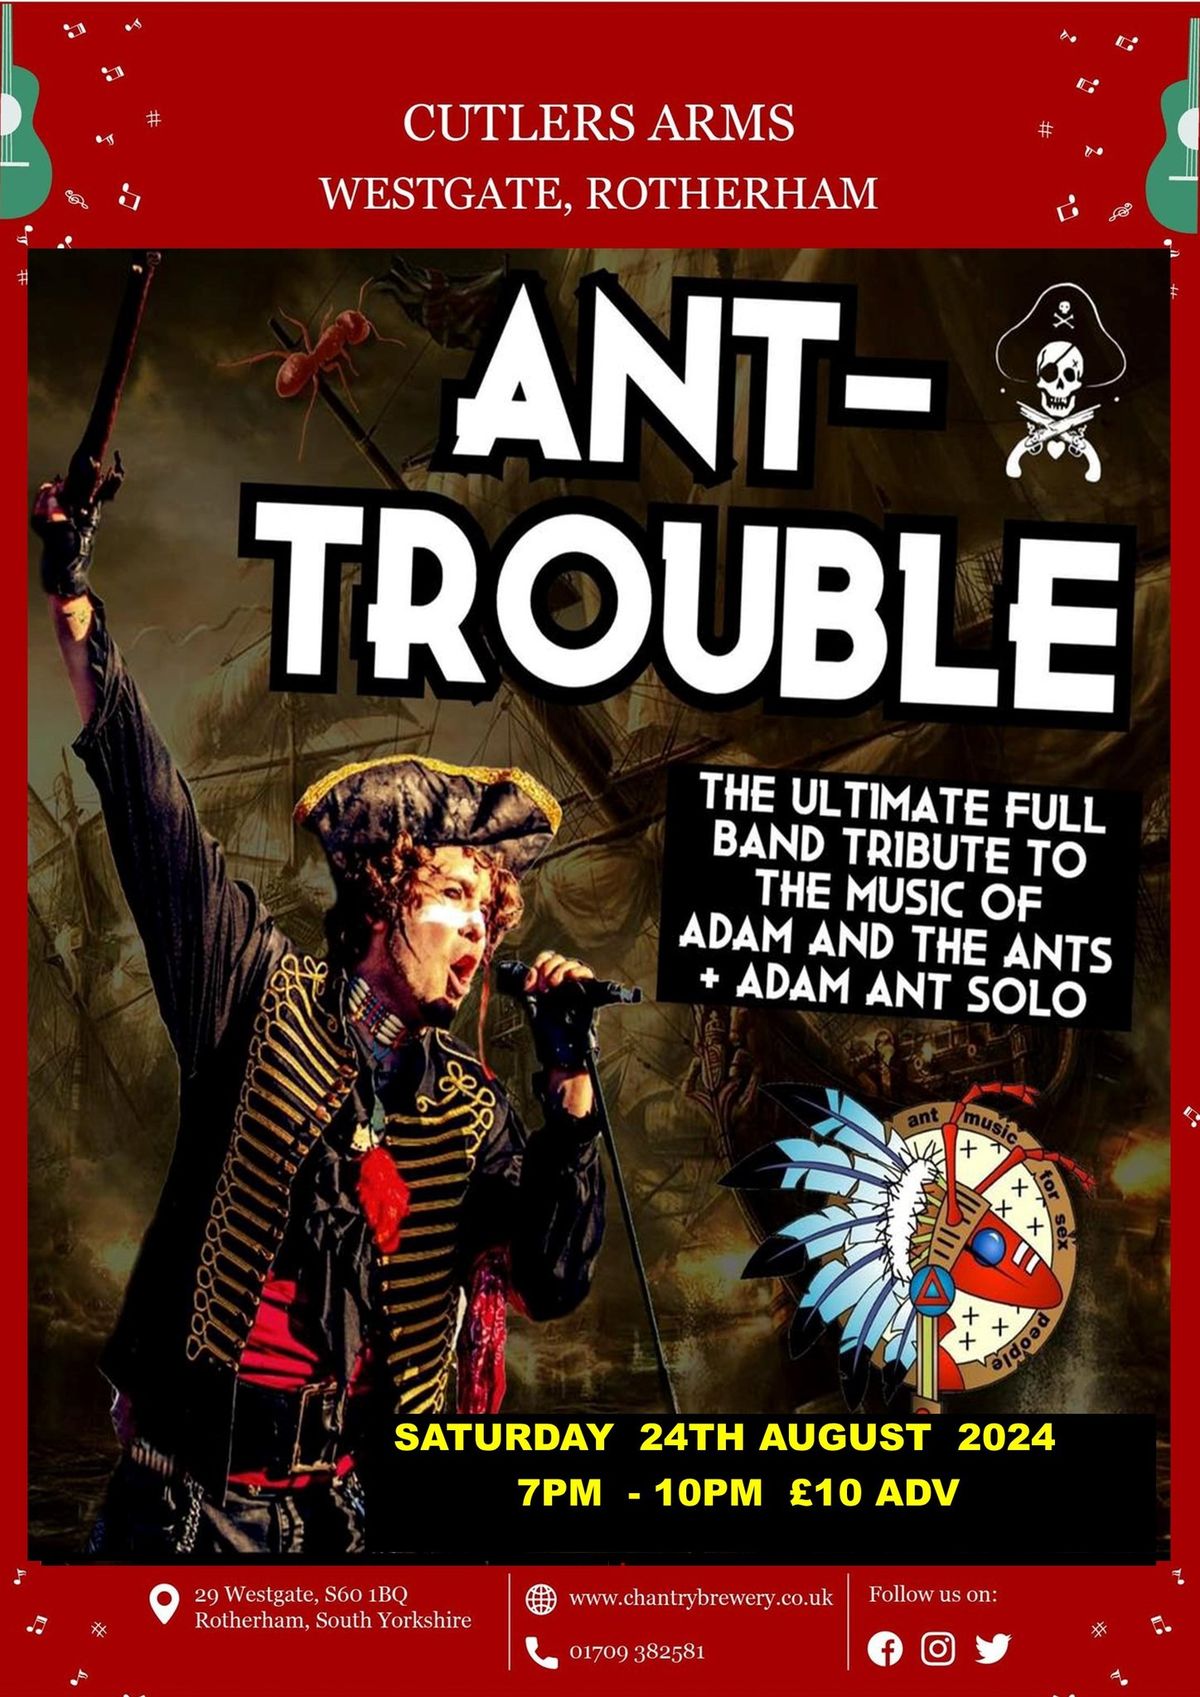  ANT TROUBLE - ADAM ANT TRIBUTE BAND 